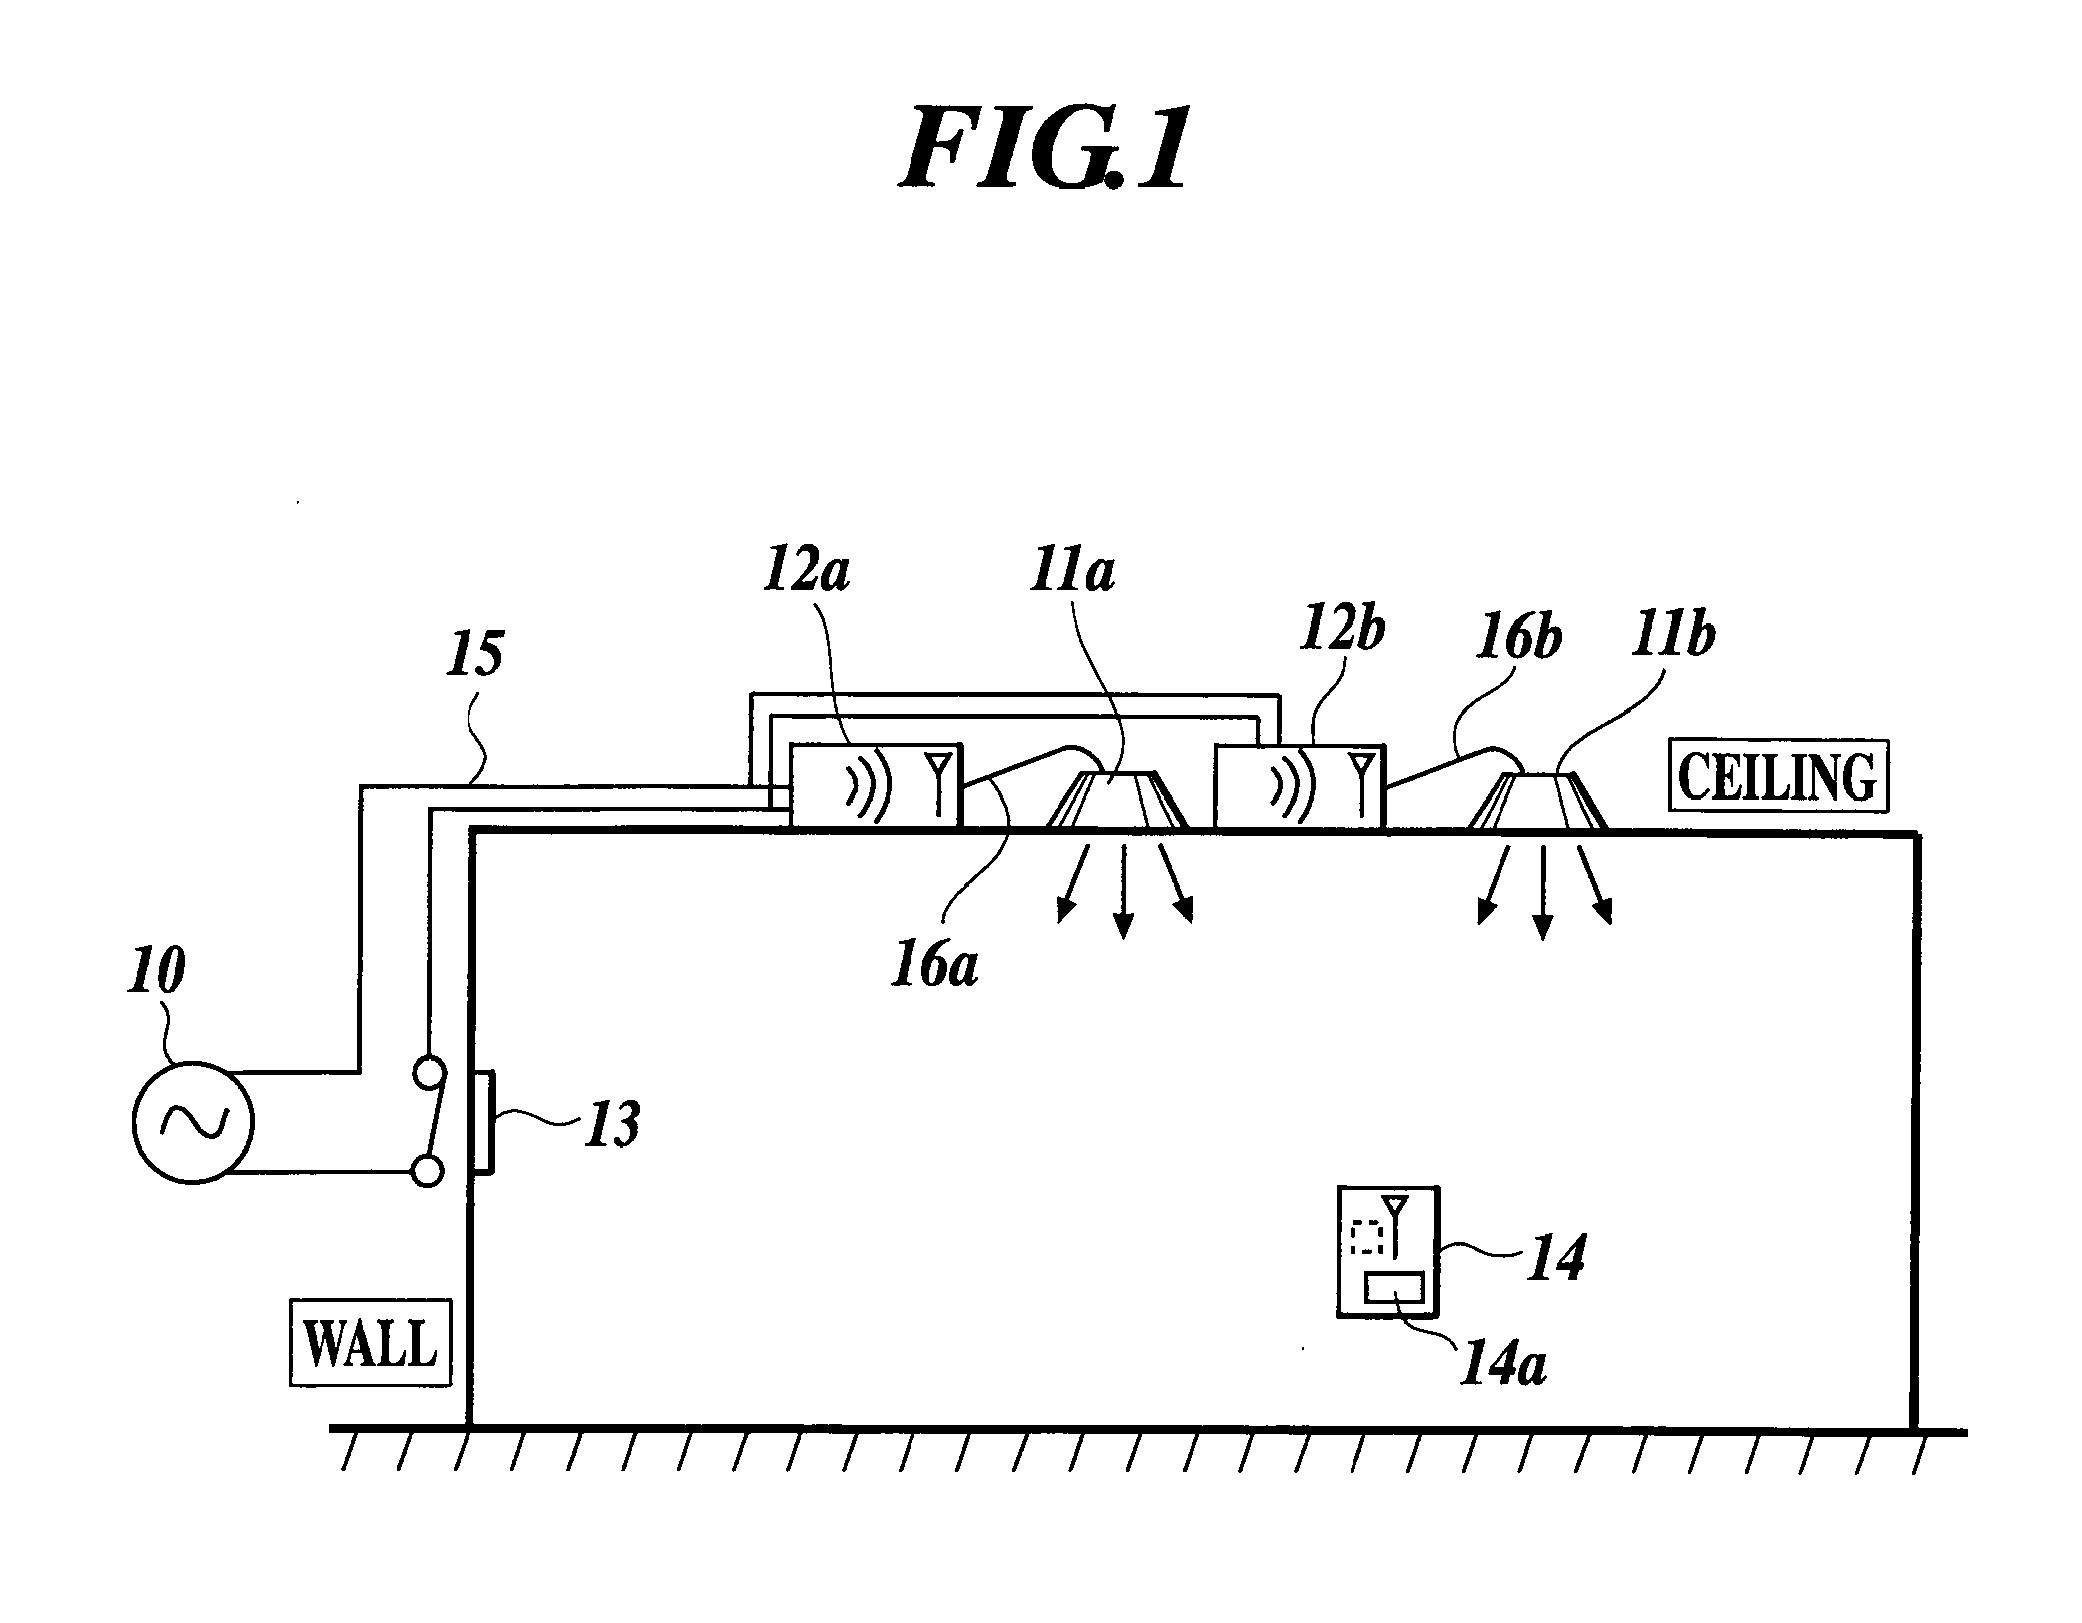 Power control device for LED lighting and lighting system